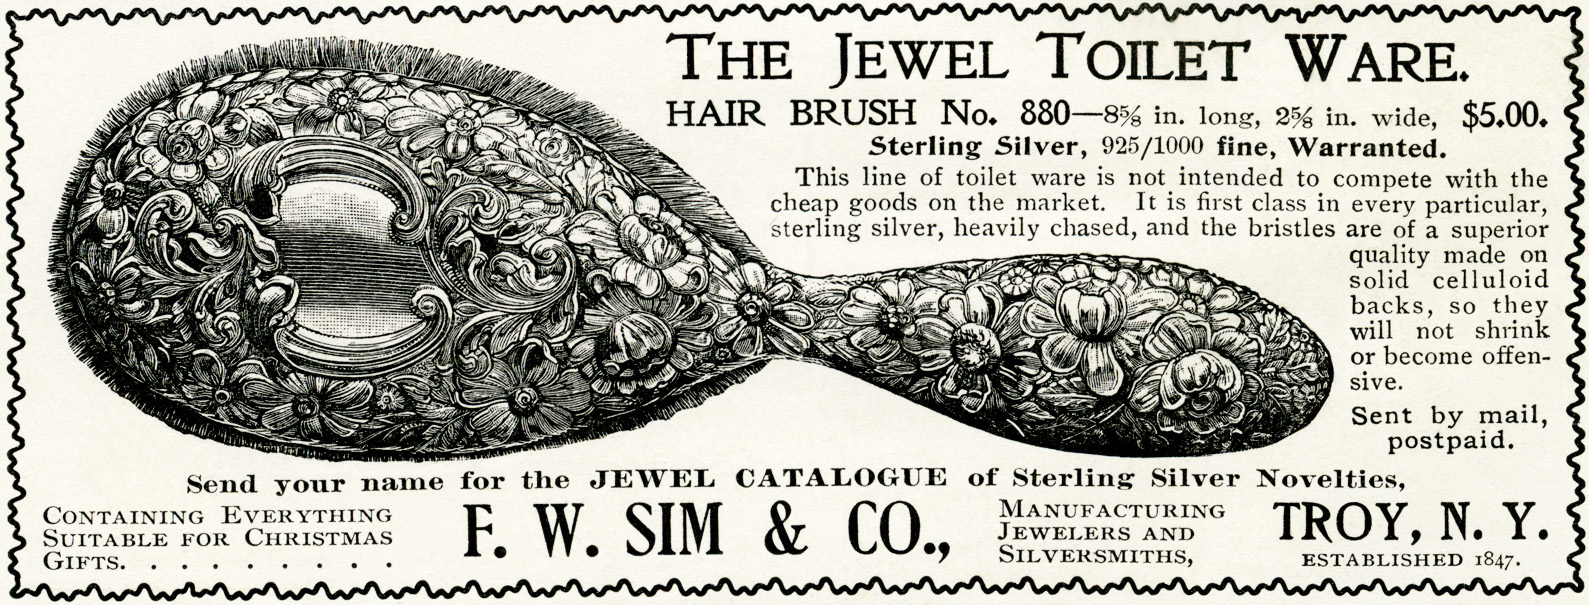 vintage brush ad, antique jewel toilet ware sterling silver brush, 1896 antique advertisement, free vintage clipart, F W Sim & Co advertising